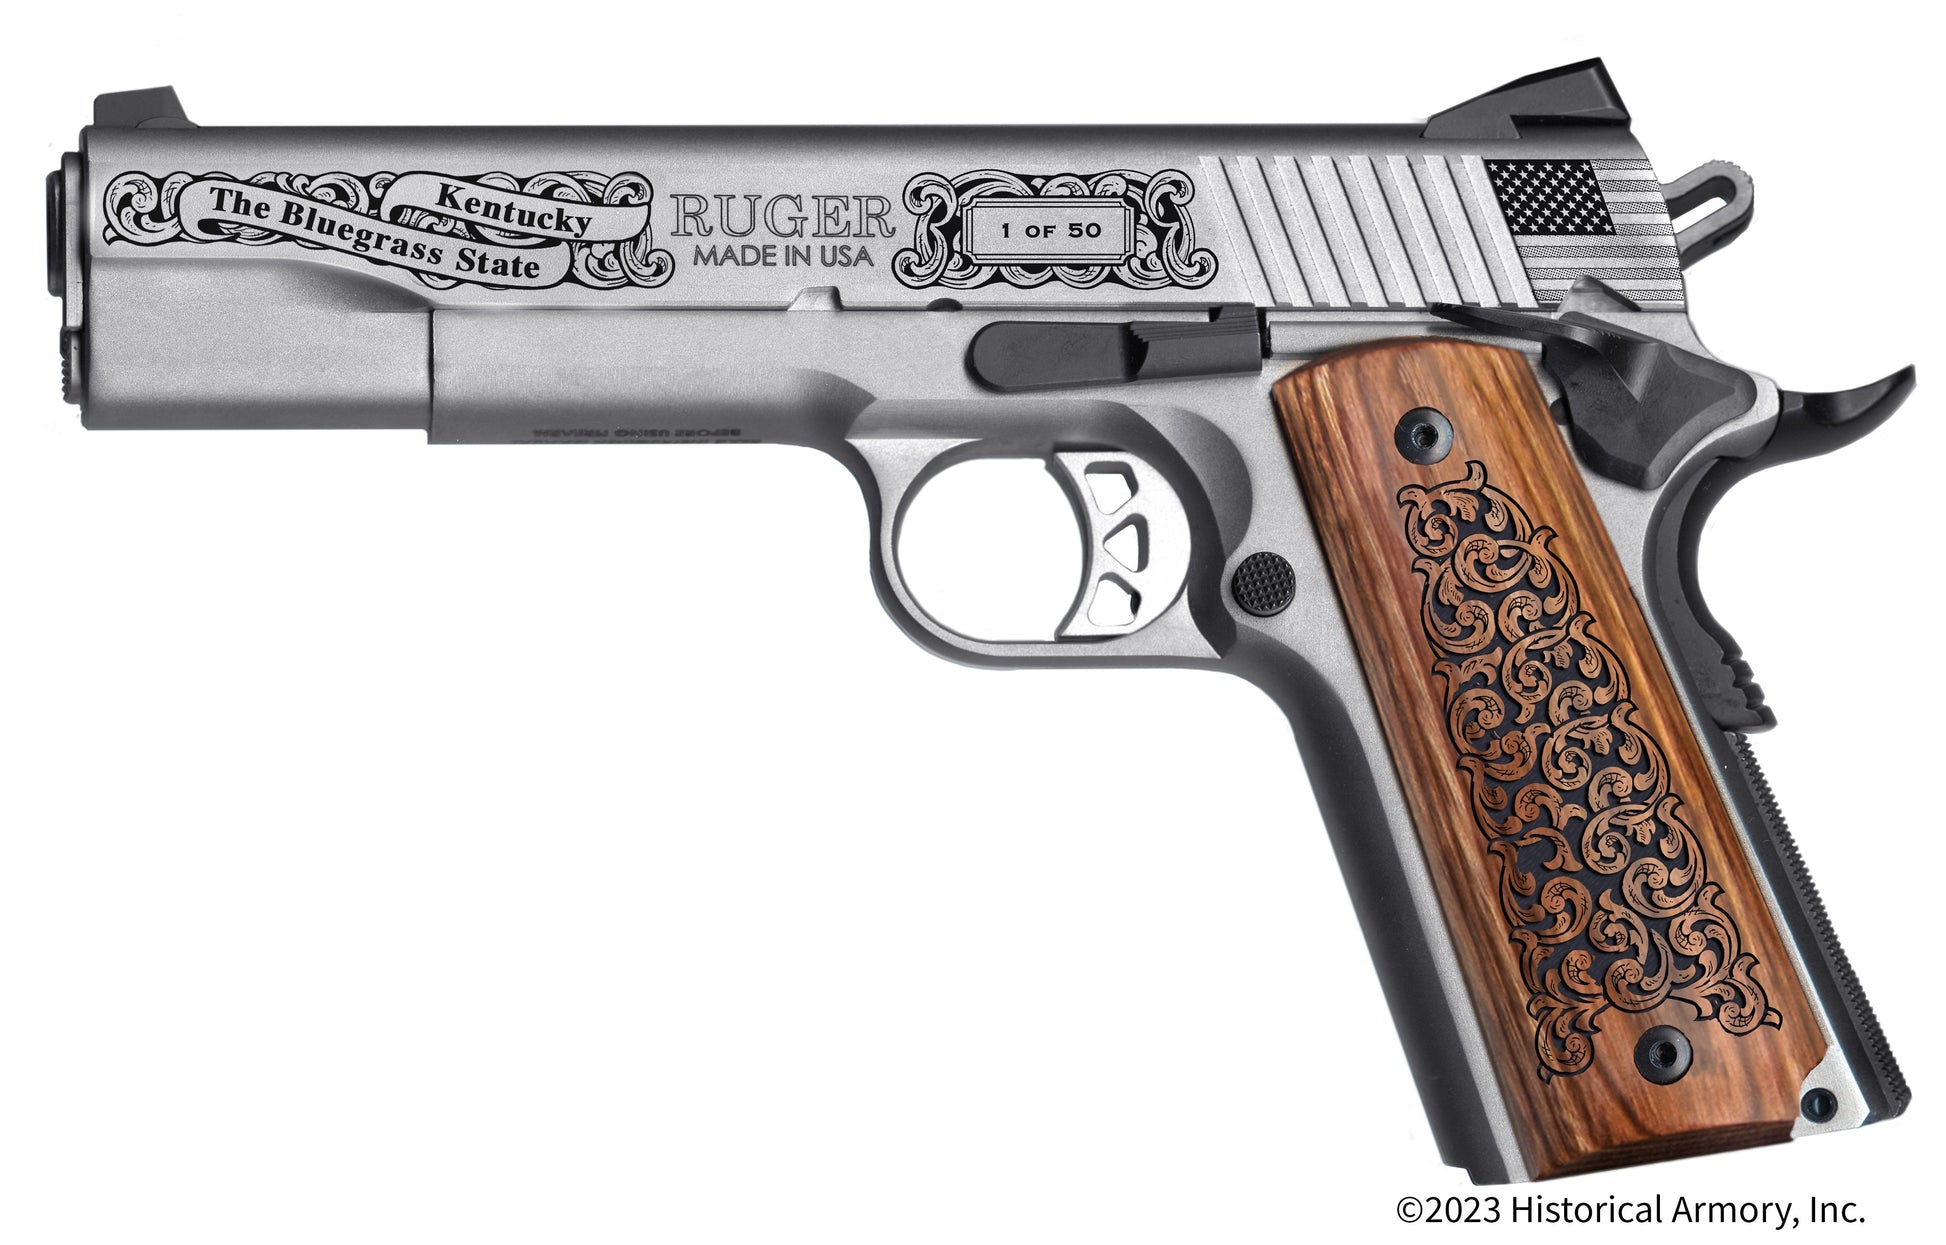 Spencer County Kentucky Engraved .45 Auto Ruger 1911